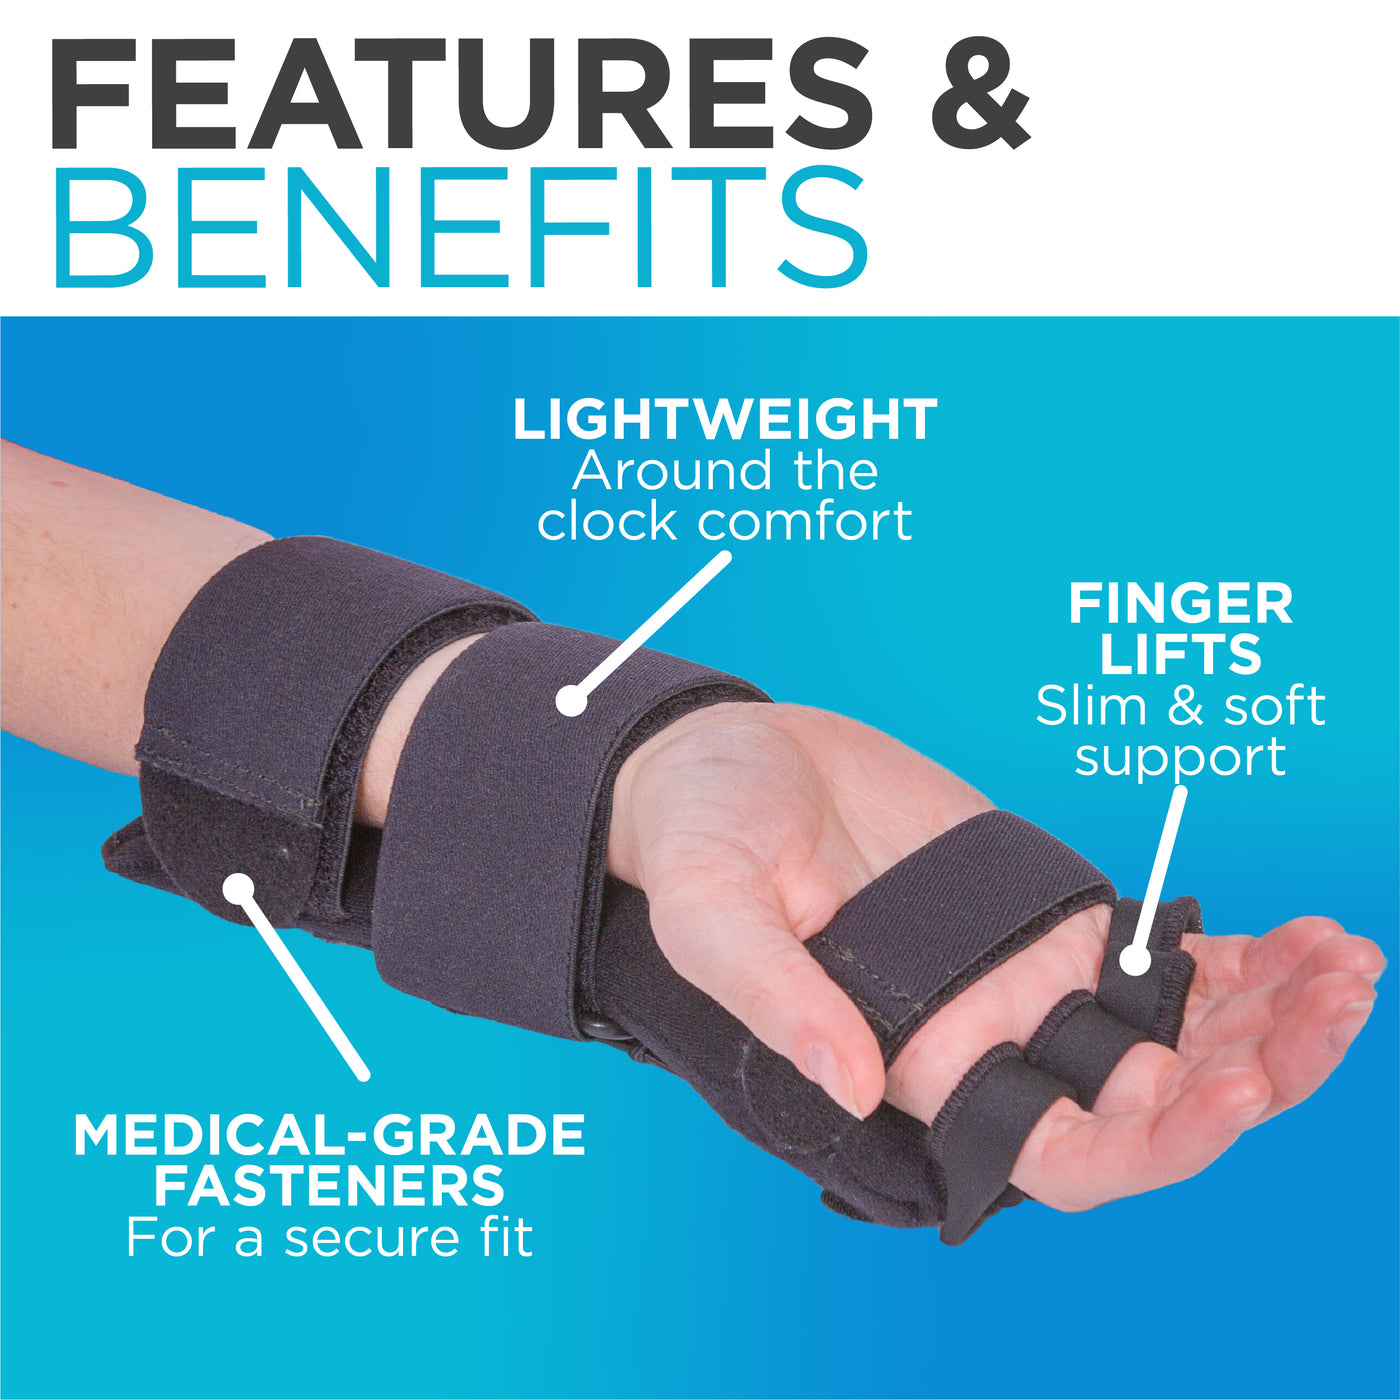 The radial nerve finger extension splint is made of lightweight elastic and medical-grade fasteners